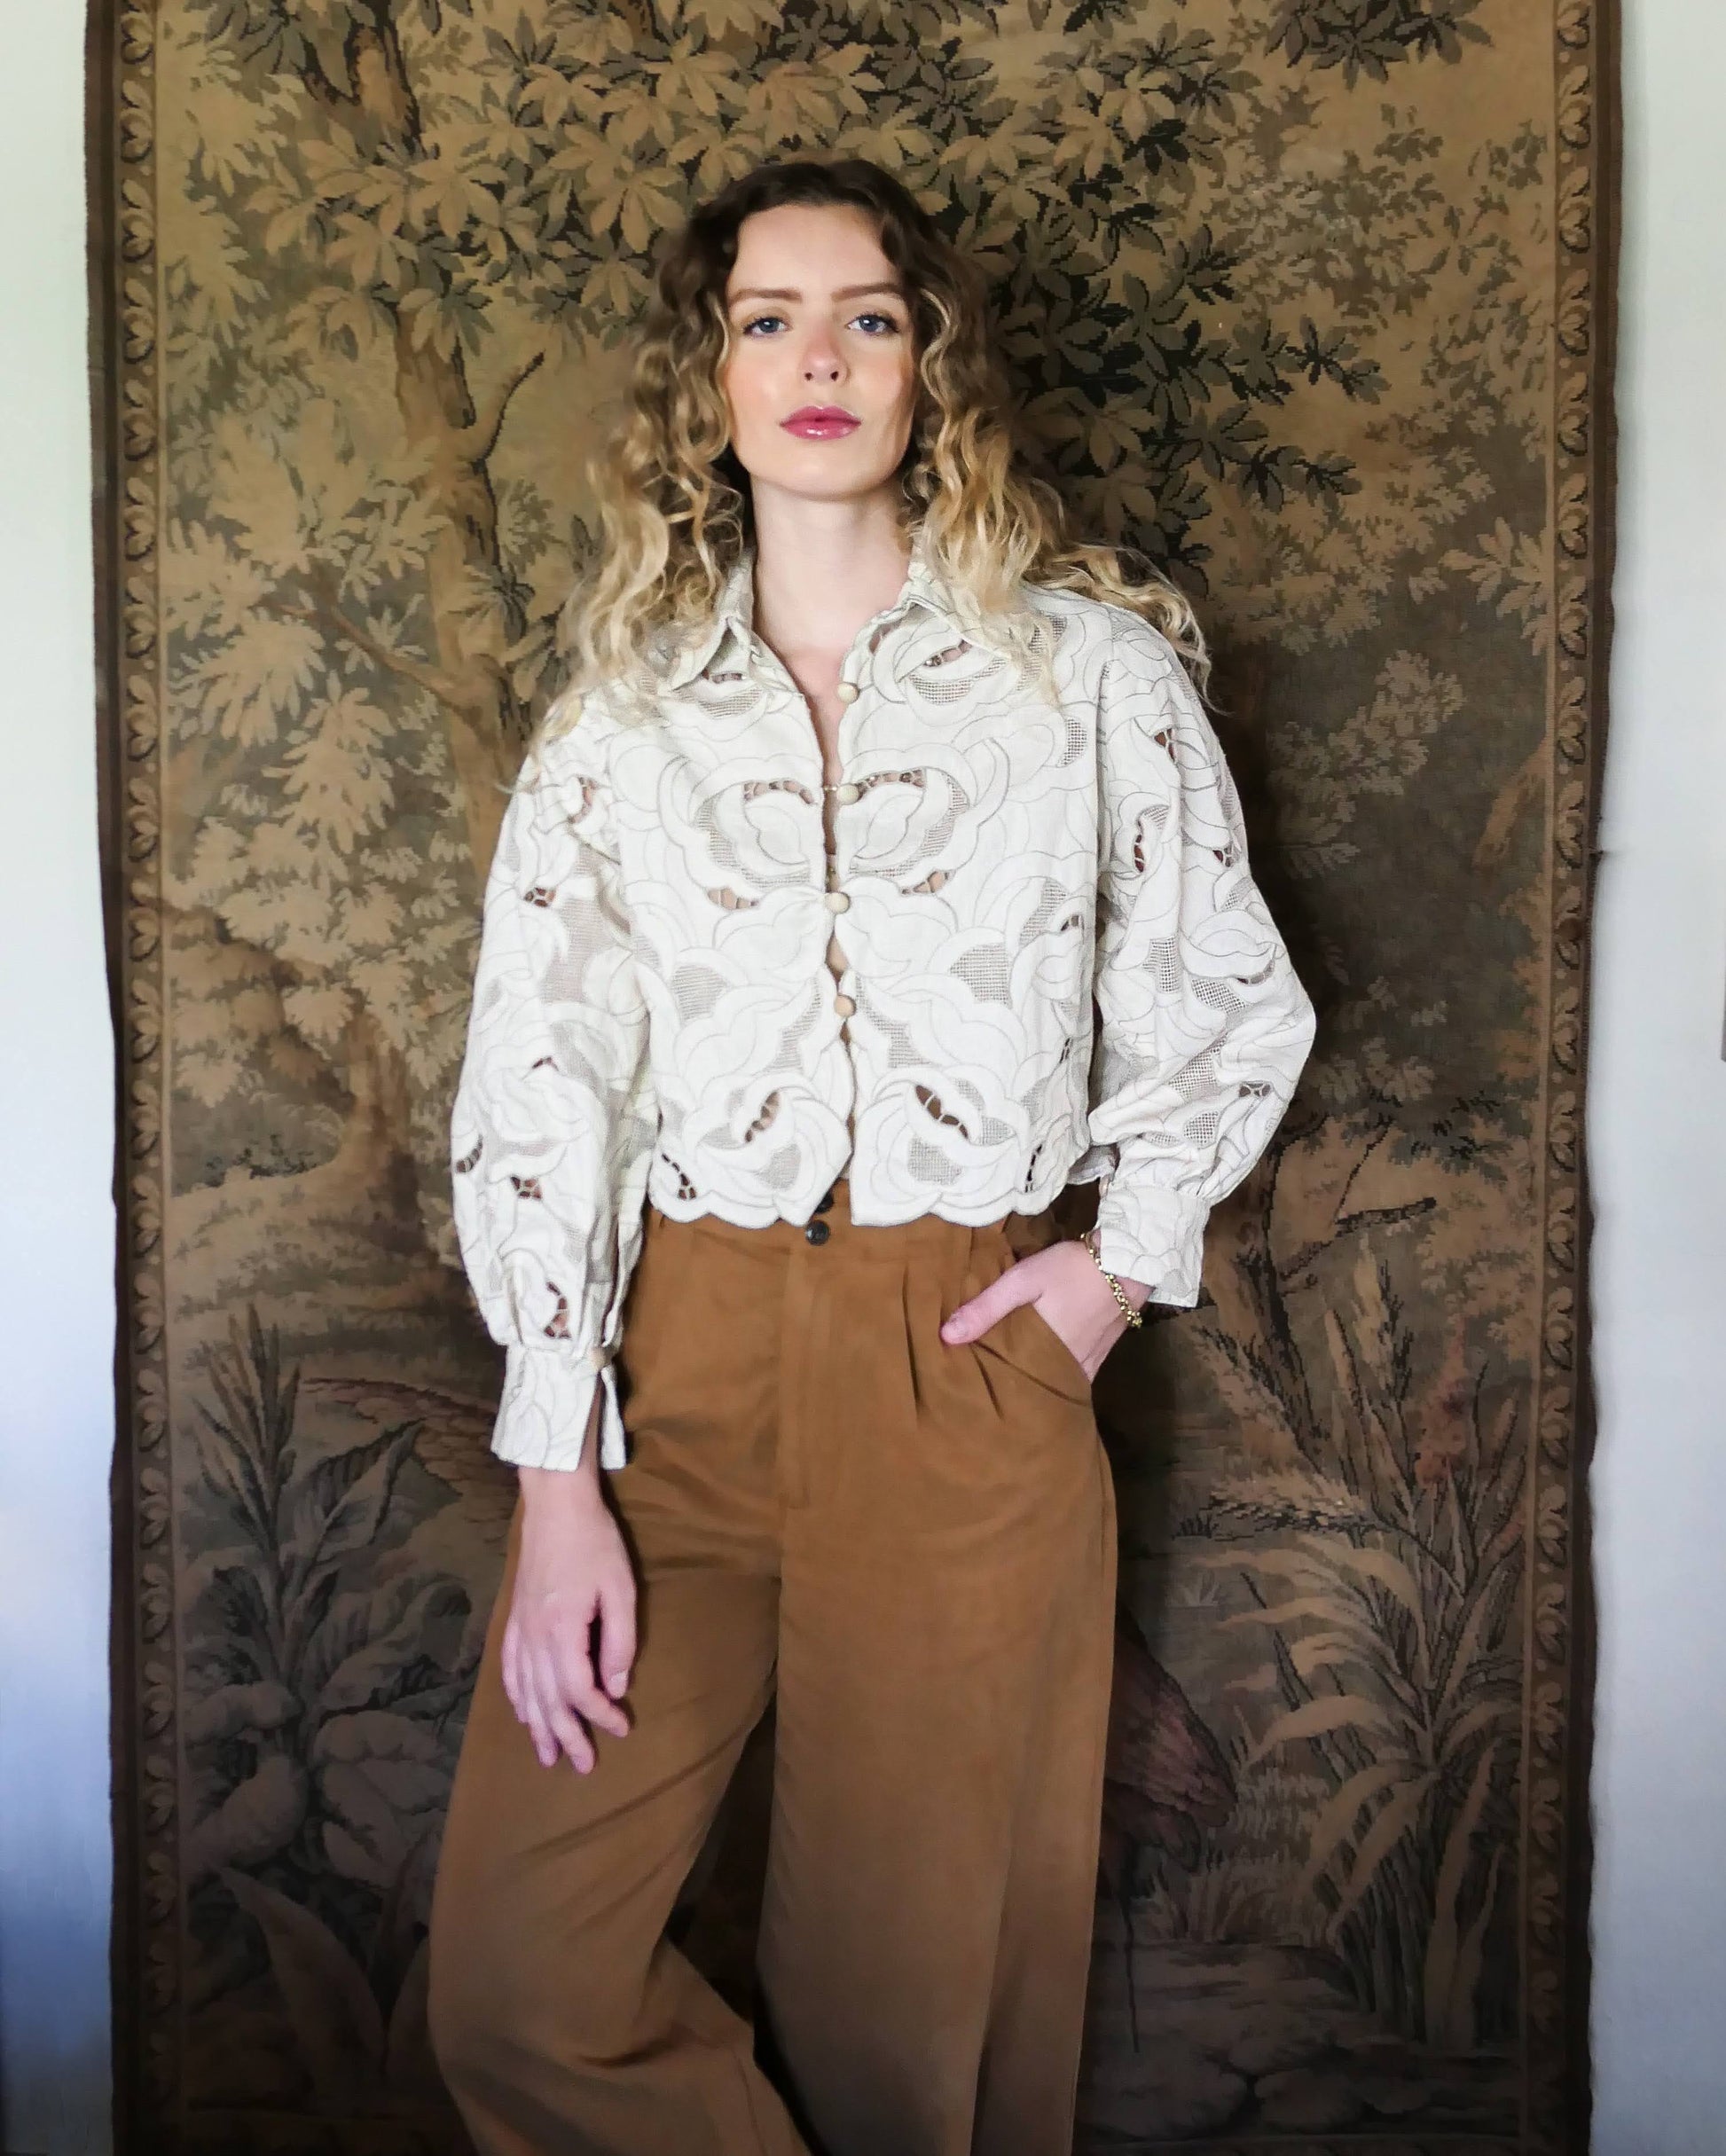 An almost crop top with a relaxed fit and warm neutral tones of cream and taupe, made with our signature Lim's Vintage embroidered cotton fabric. Comes with romantic puffed long sleeves and a scalloped hem. Wear it buttoned or unbuttoned, with wide leg fall colored slacks or jeans and leather boots.